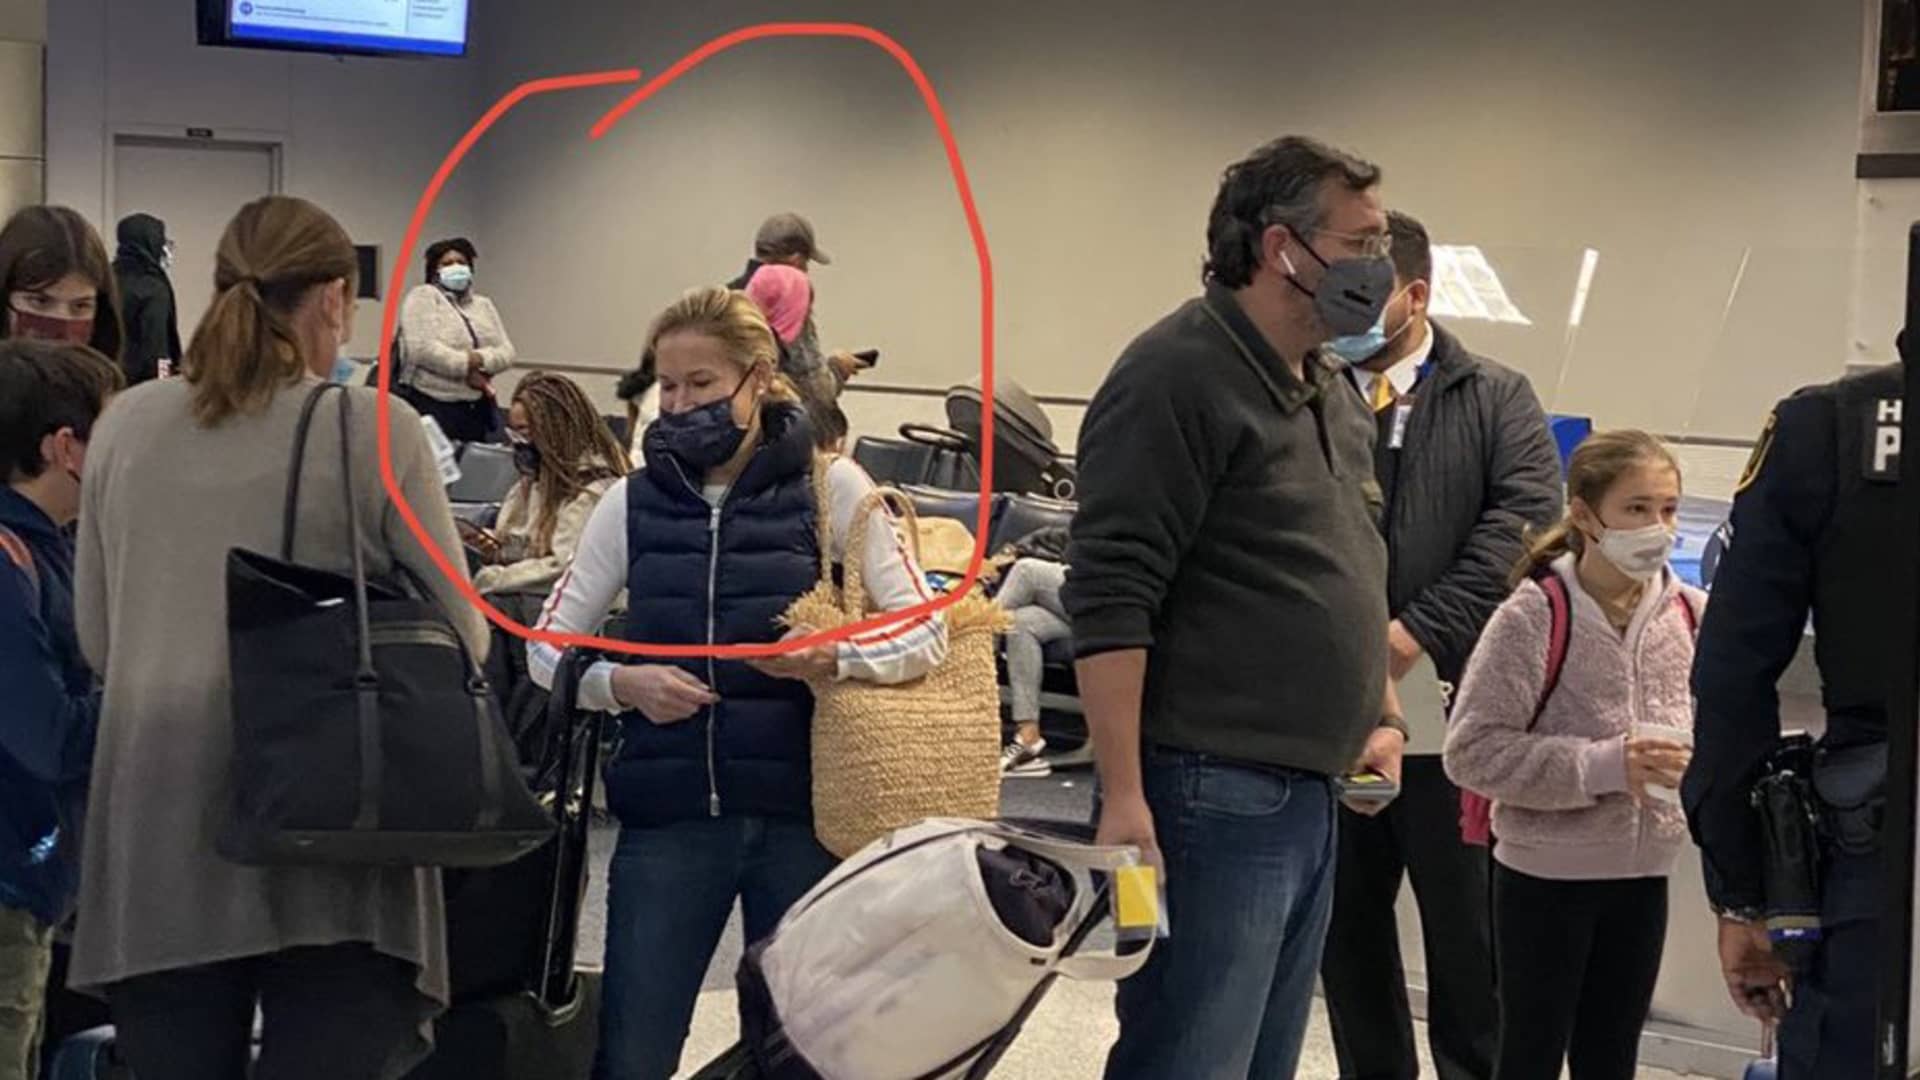 Images purportedly showing Ted Cruz with Heidi Cruz (circled) board a United Airlines Flight to Cancun, Mexico from Houston, TX.